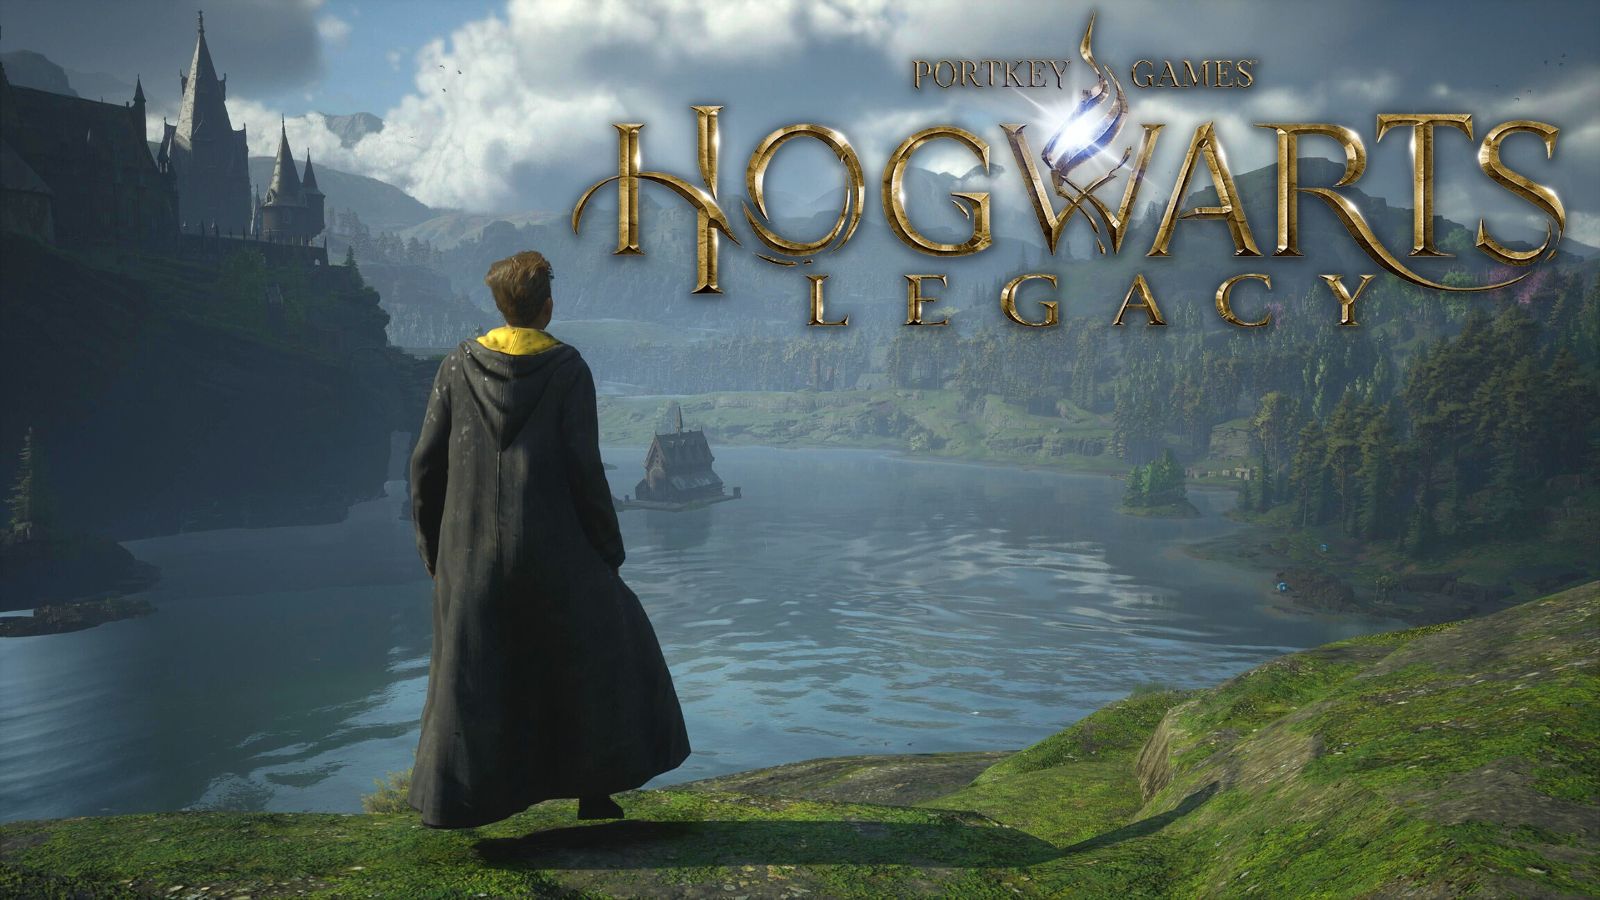 Hogwarts Legacy Map guide: All regions, towns, locations & more